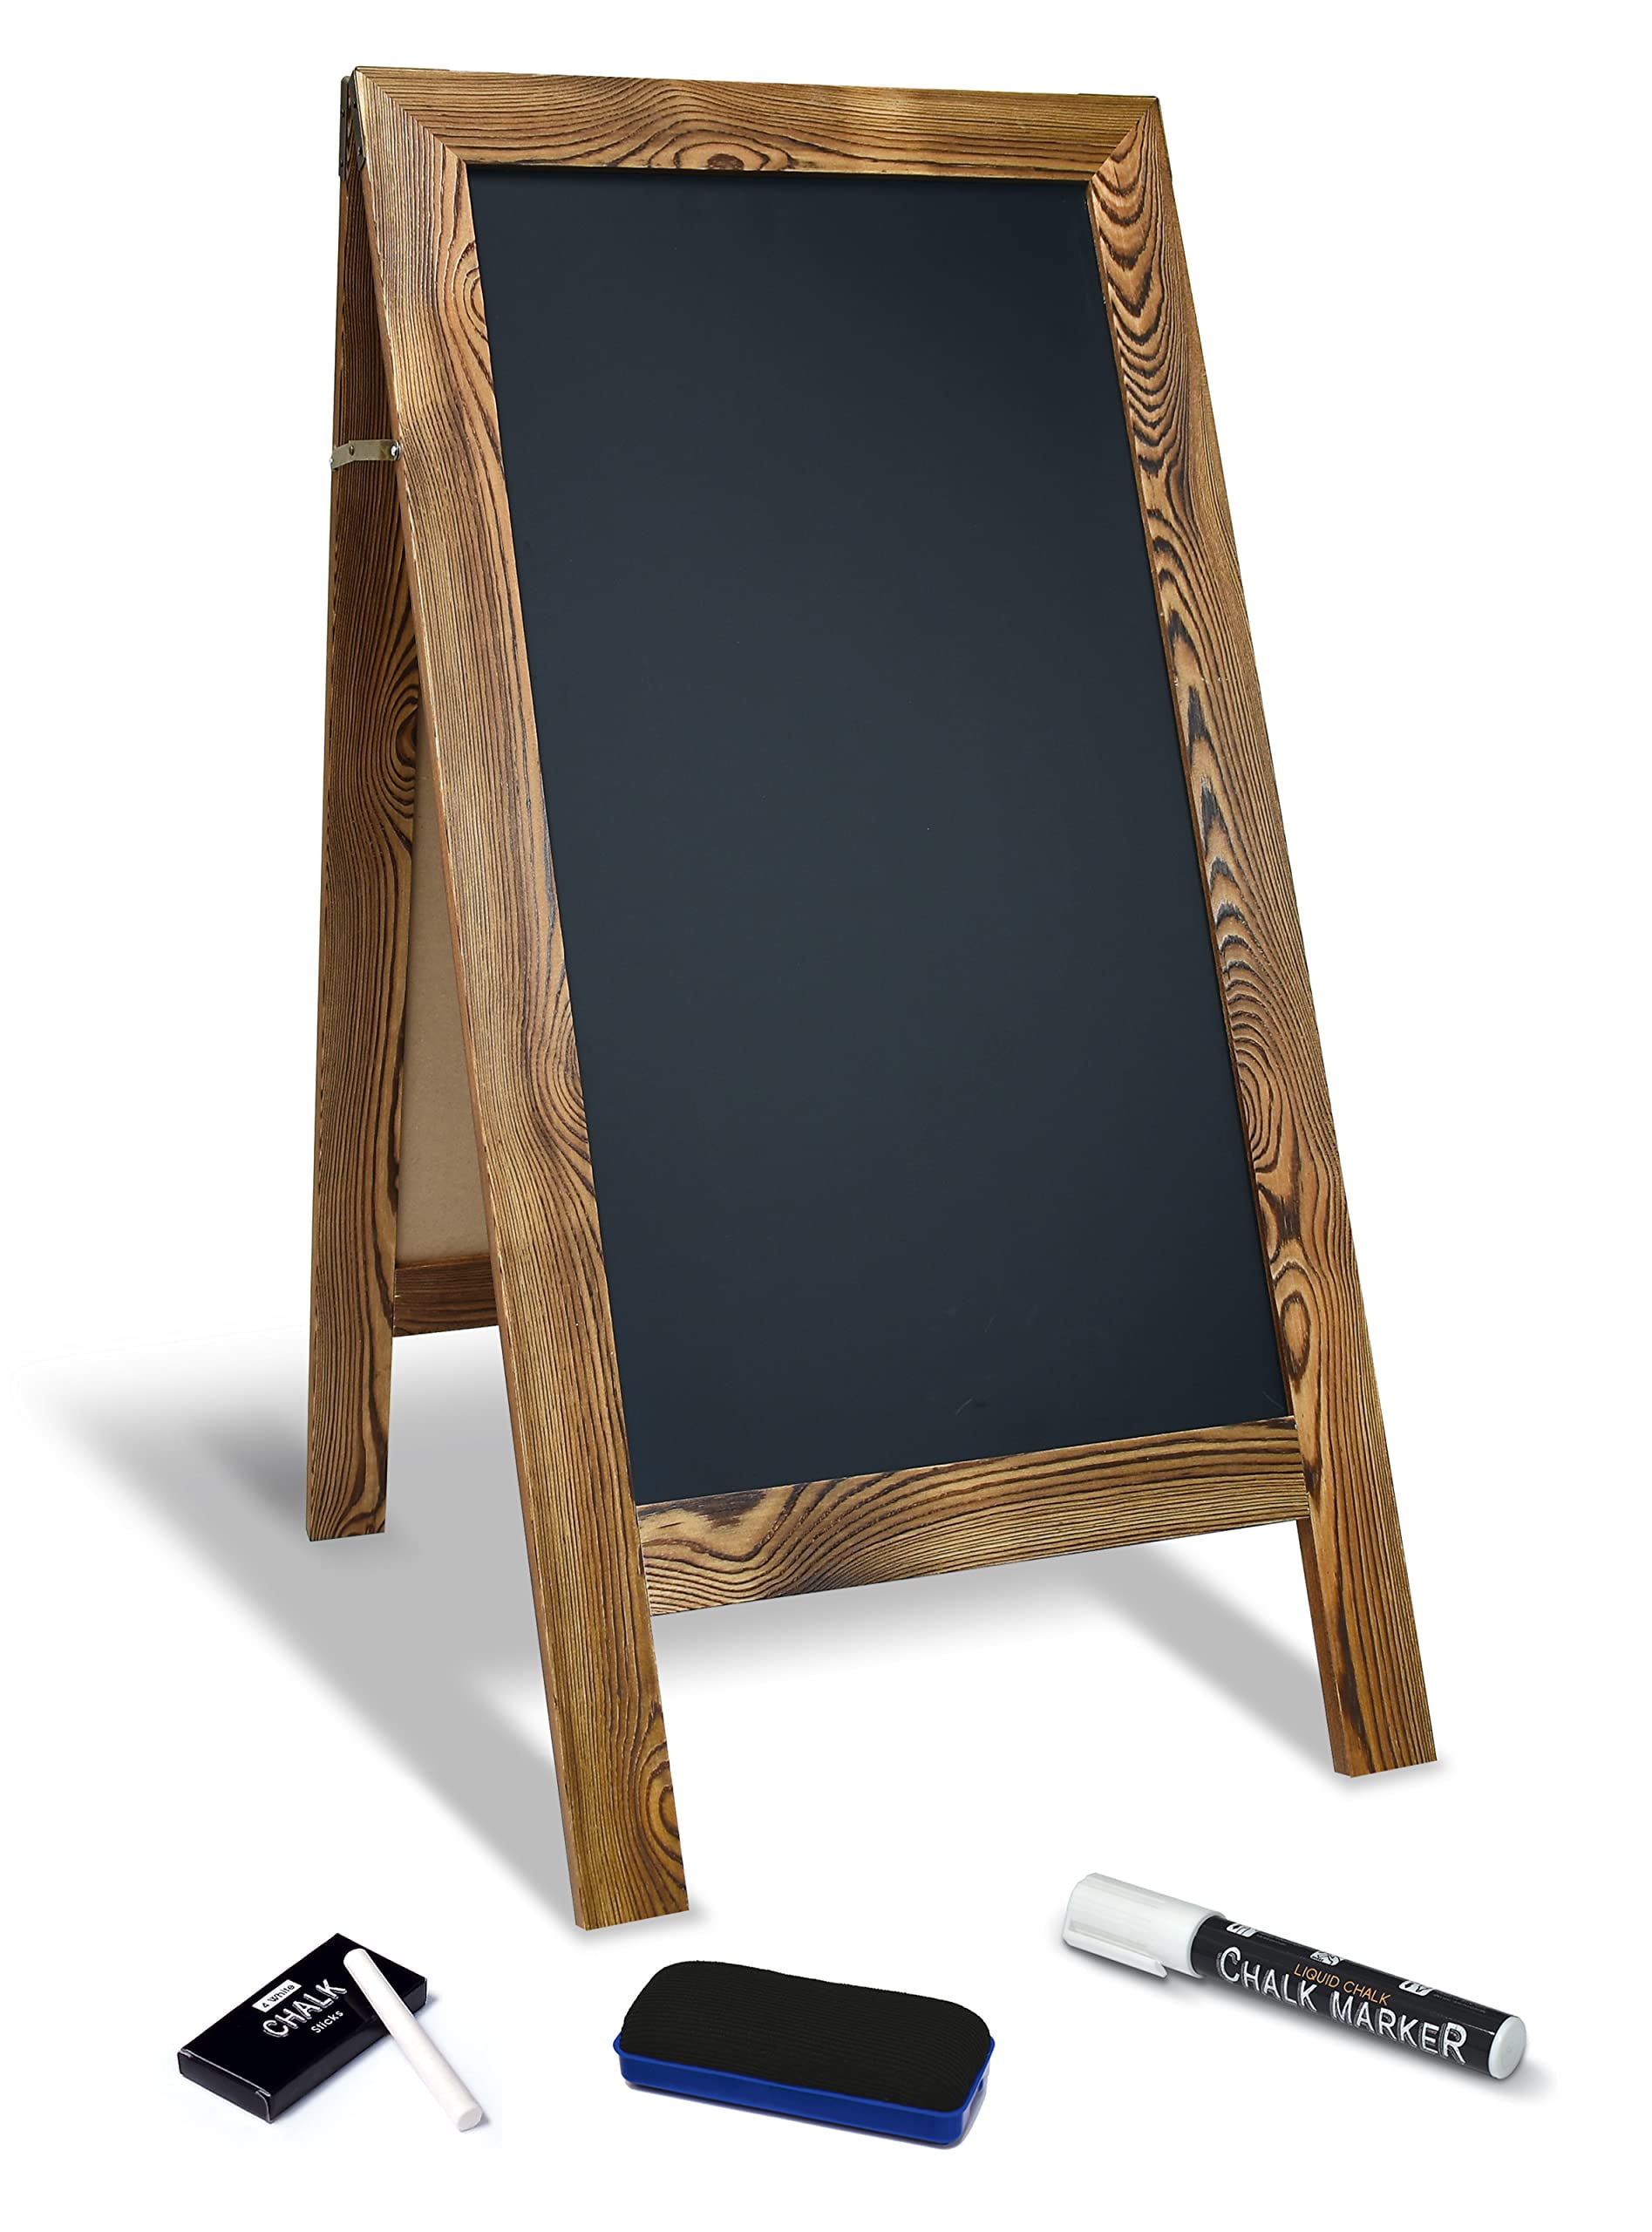 Magnetic A-Frame Chalkboard Sign, Extra Large 20 x 40, Standing Chalkboard  Easel, with Chalk Marker + Chalk & Eraser, Sandwich Board Outdoor Sidewalk  Sign, by Better Office Products (Black) 